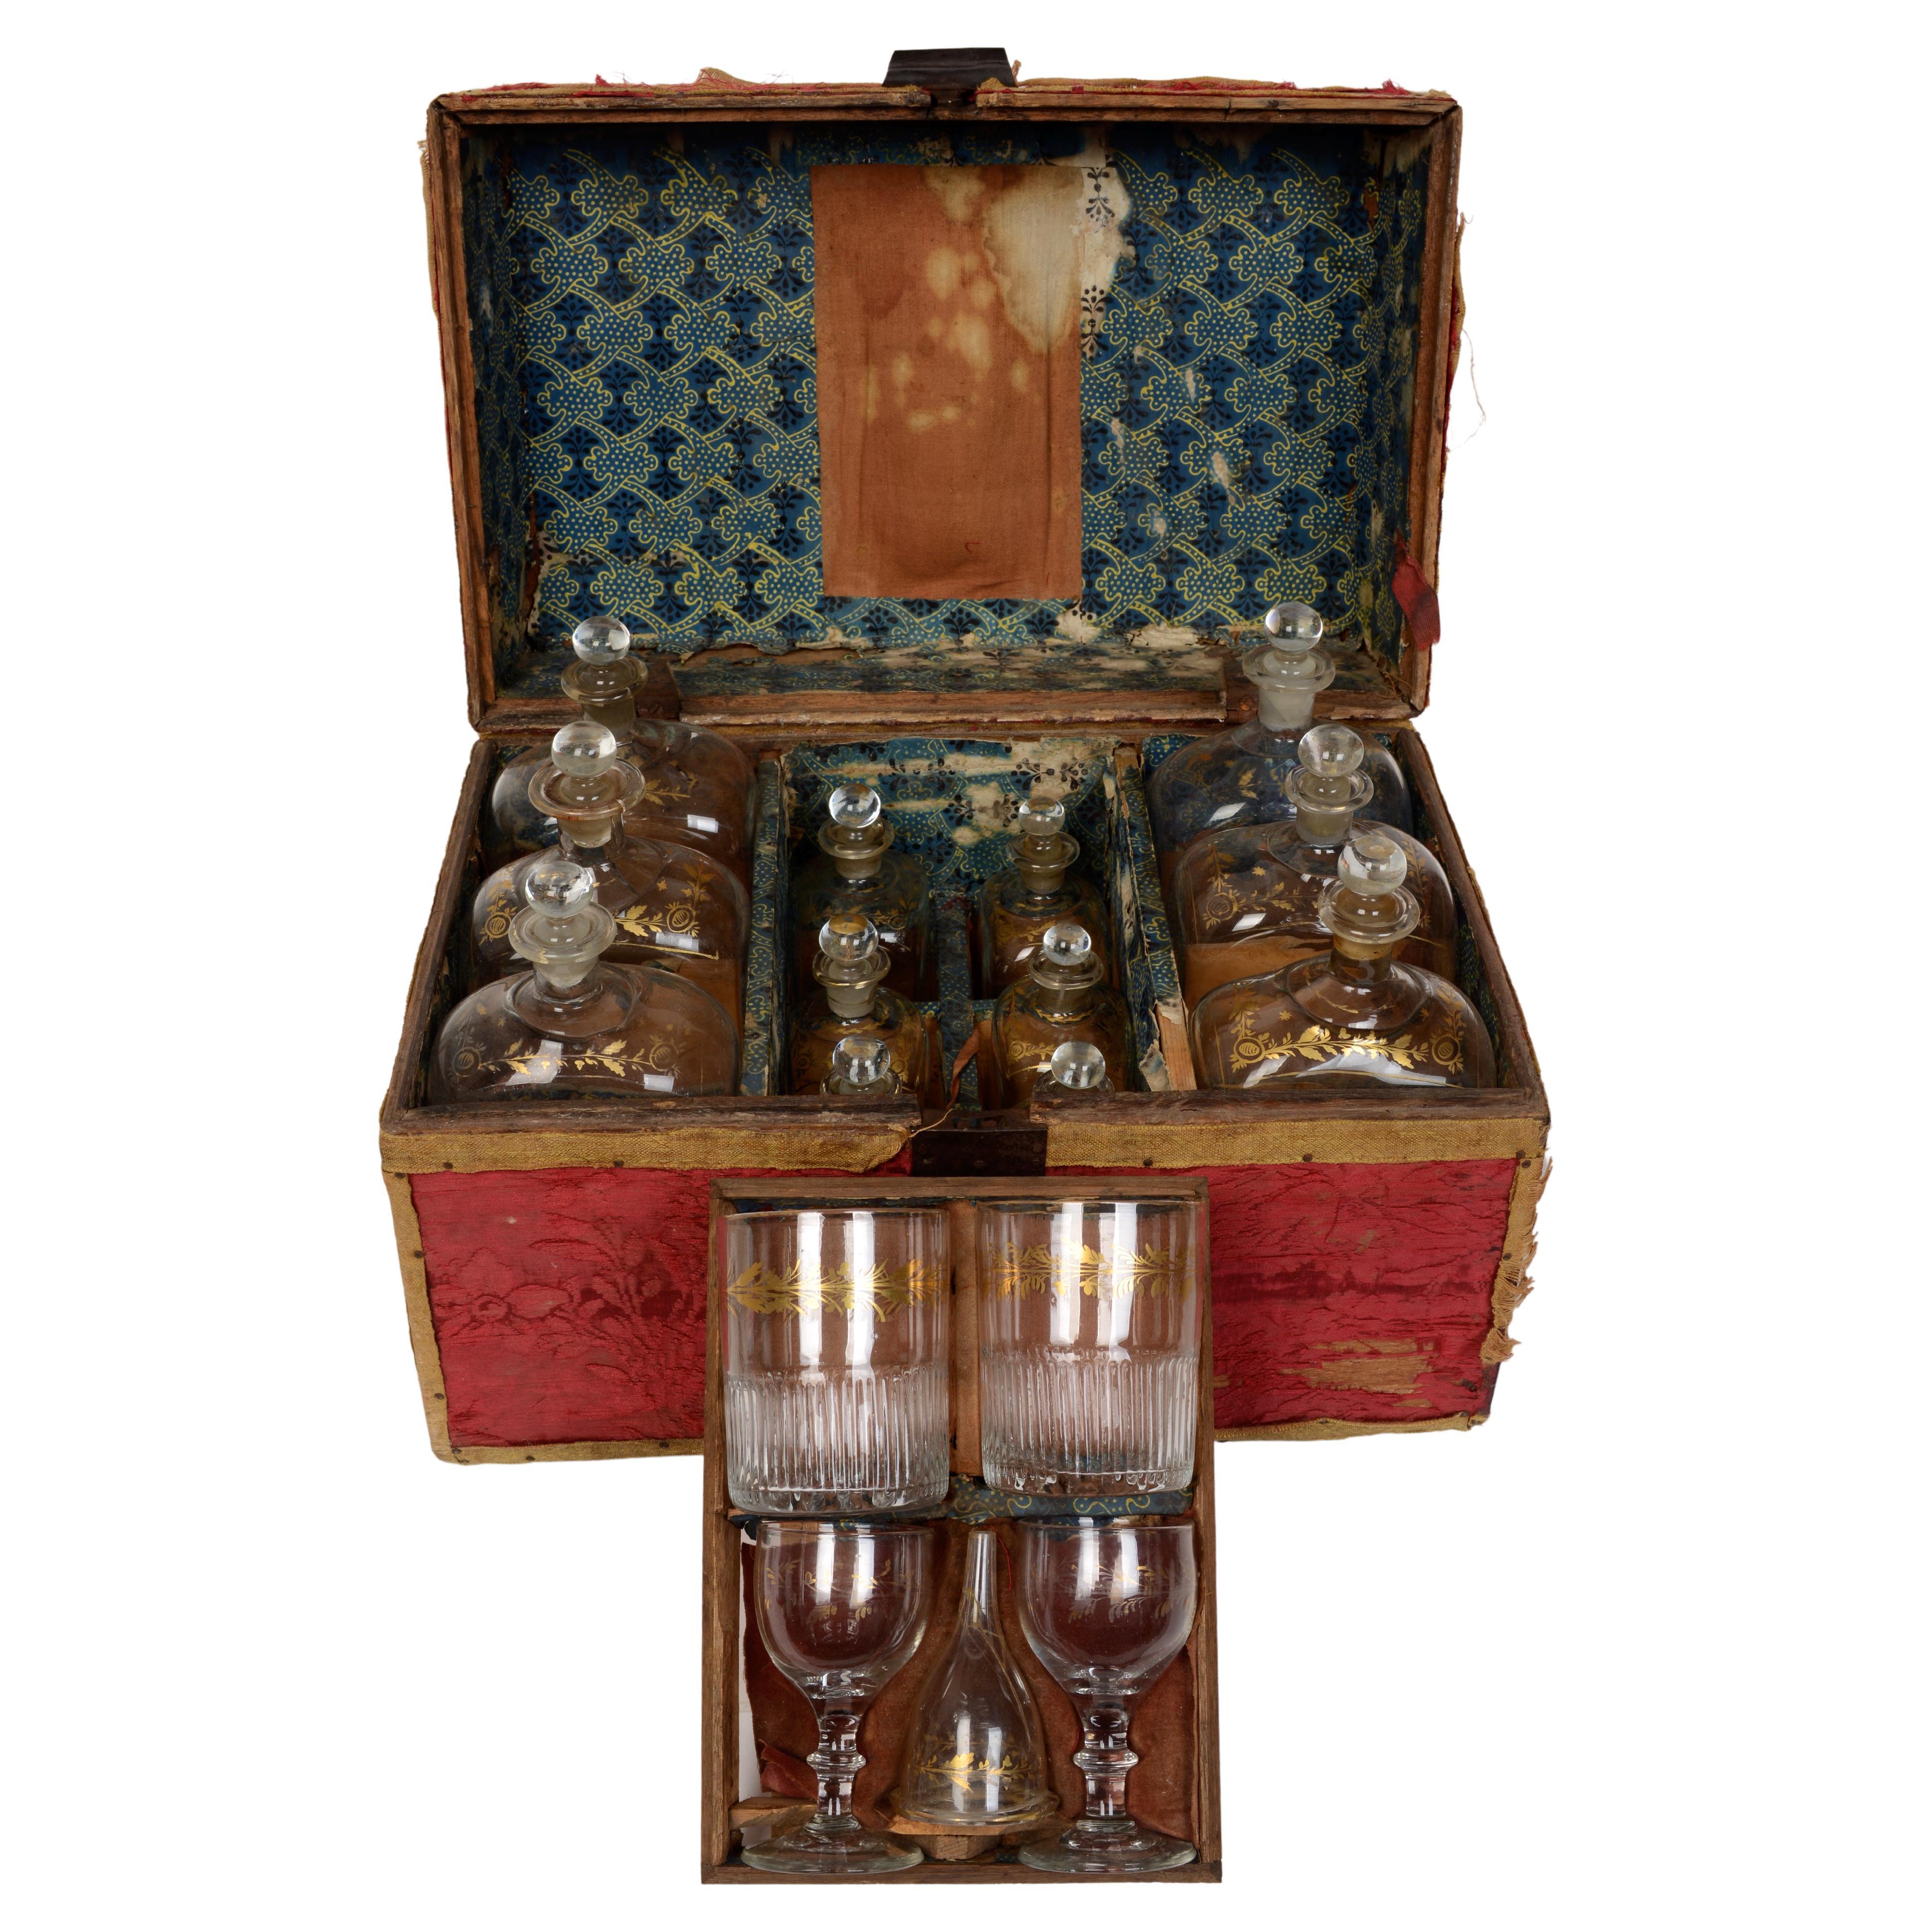 Fitted Traveling Case Original Blown Bottles & Crimson Brocade Cover Late 18th C